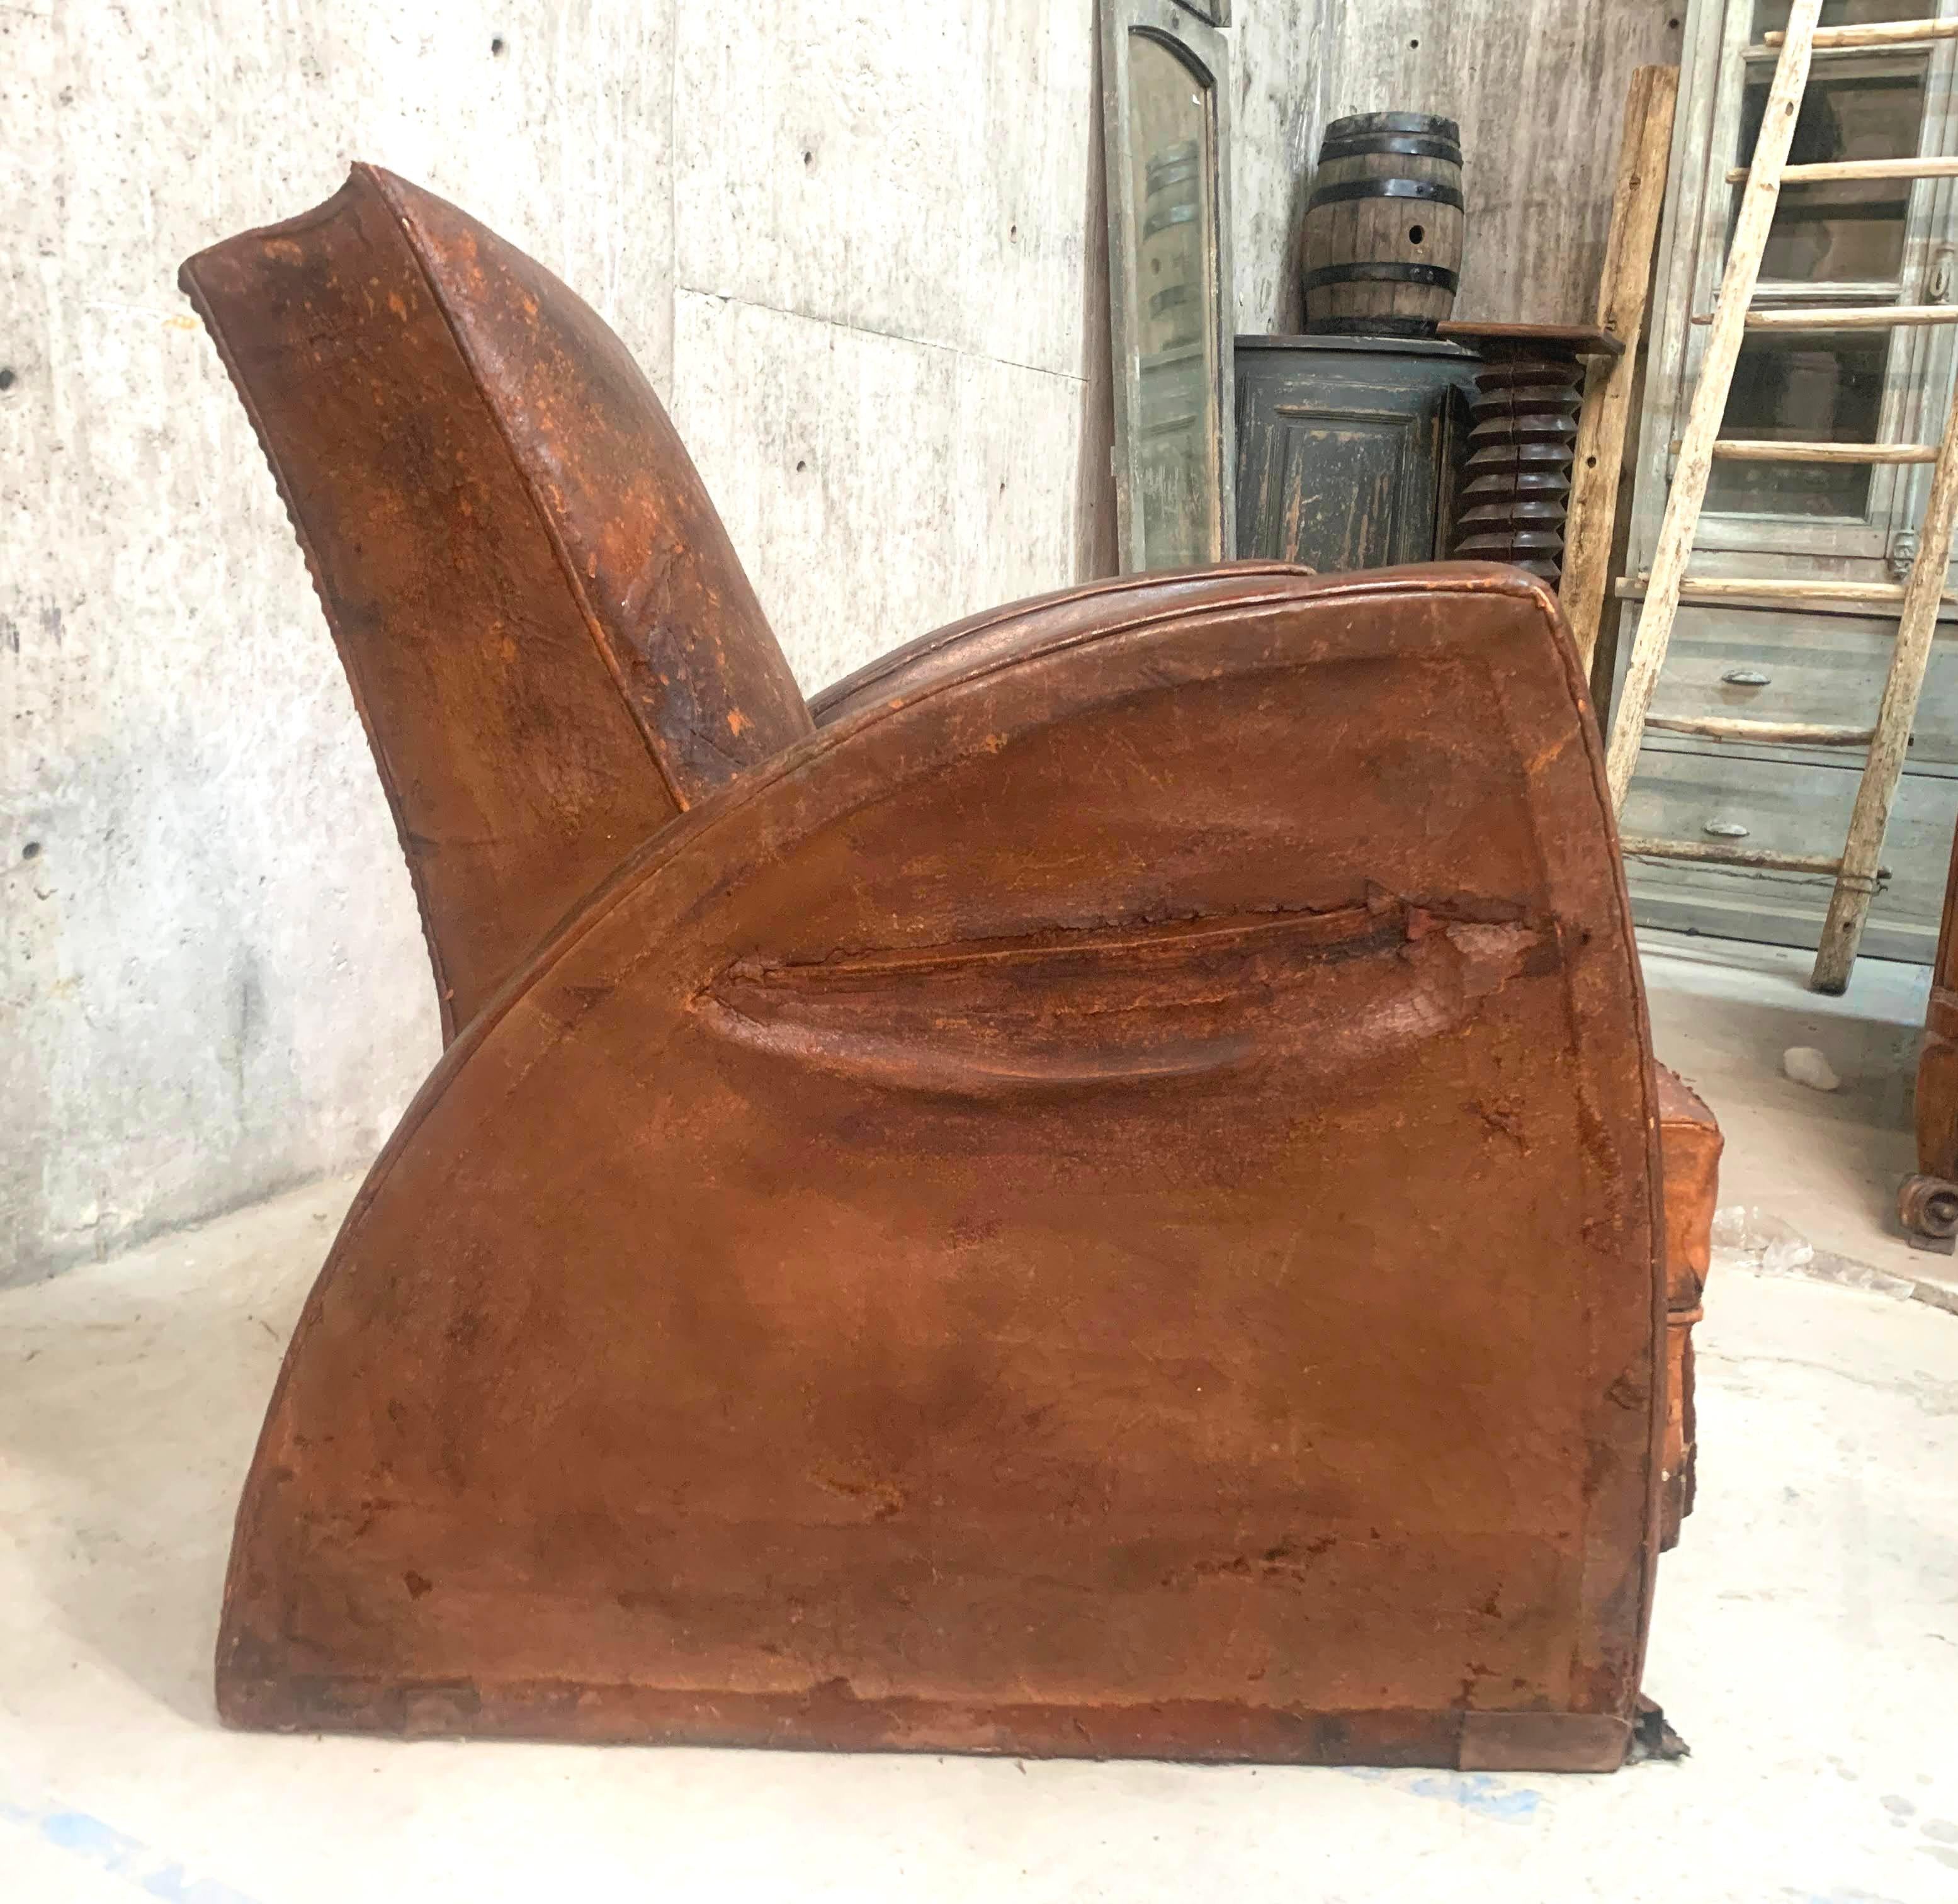 Rare French Art Deco leather club chair, c.1930s. Unique curves and lines characteristic of Art Deco style. Side pocket on arm for newspaper and magazine storage. Could benefit from restoration.

SH- 17